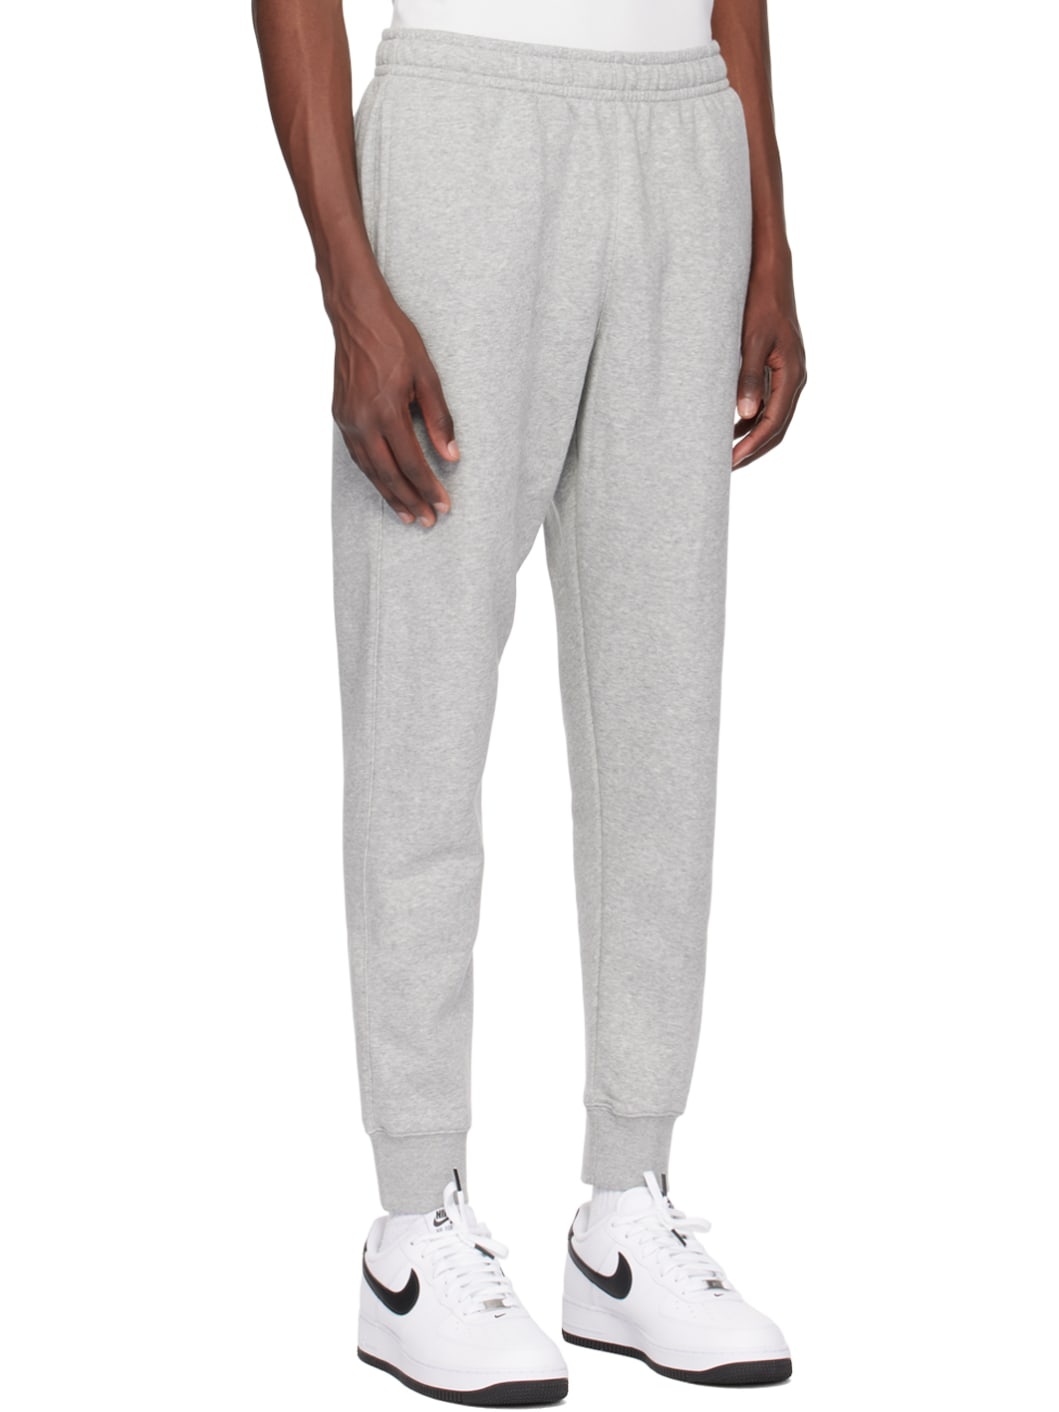 Gray Embroidered Sweatpants - 2